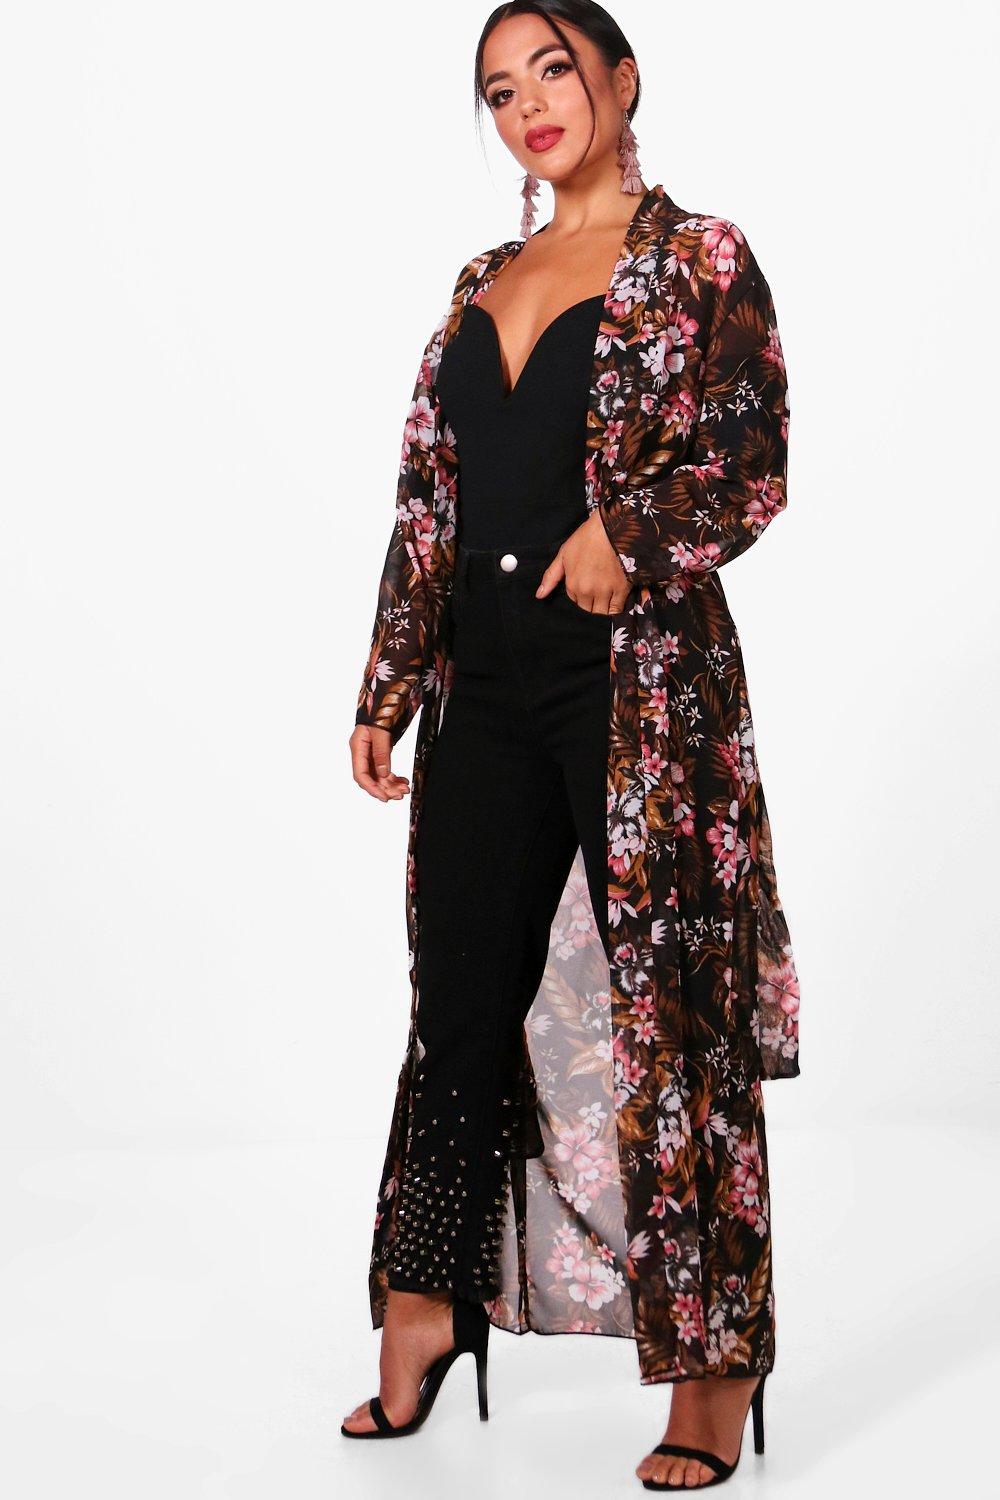 Petite Alicia Dark Floral Chiffon Belted Duster | Boohoo